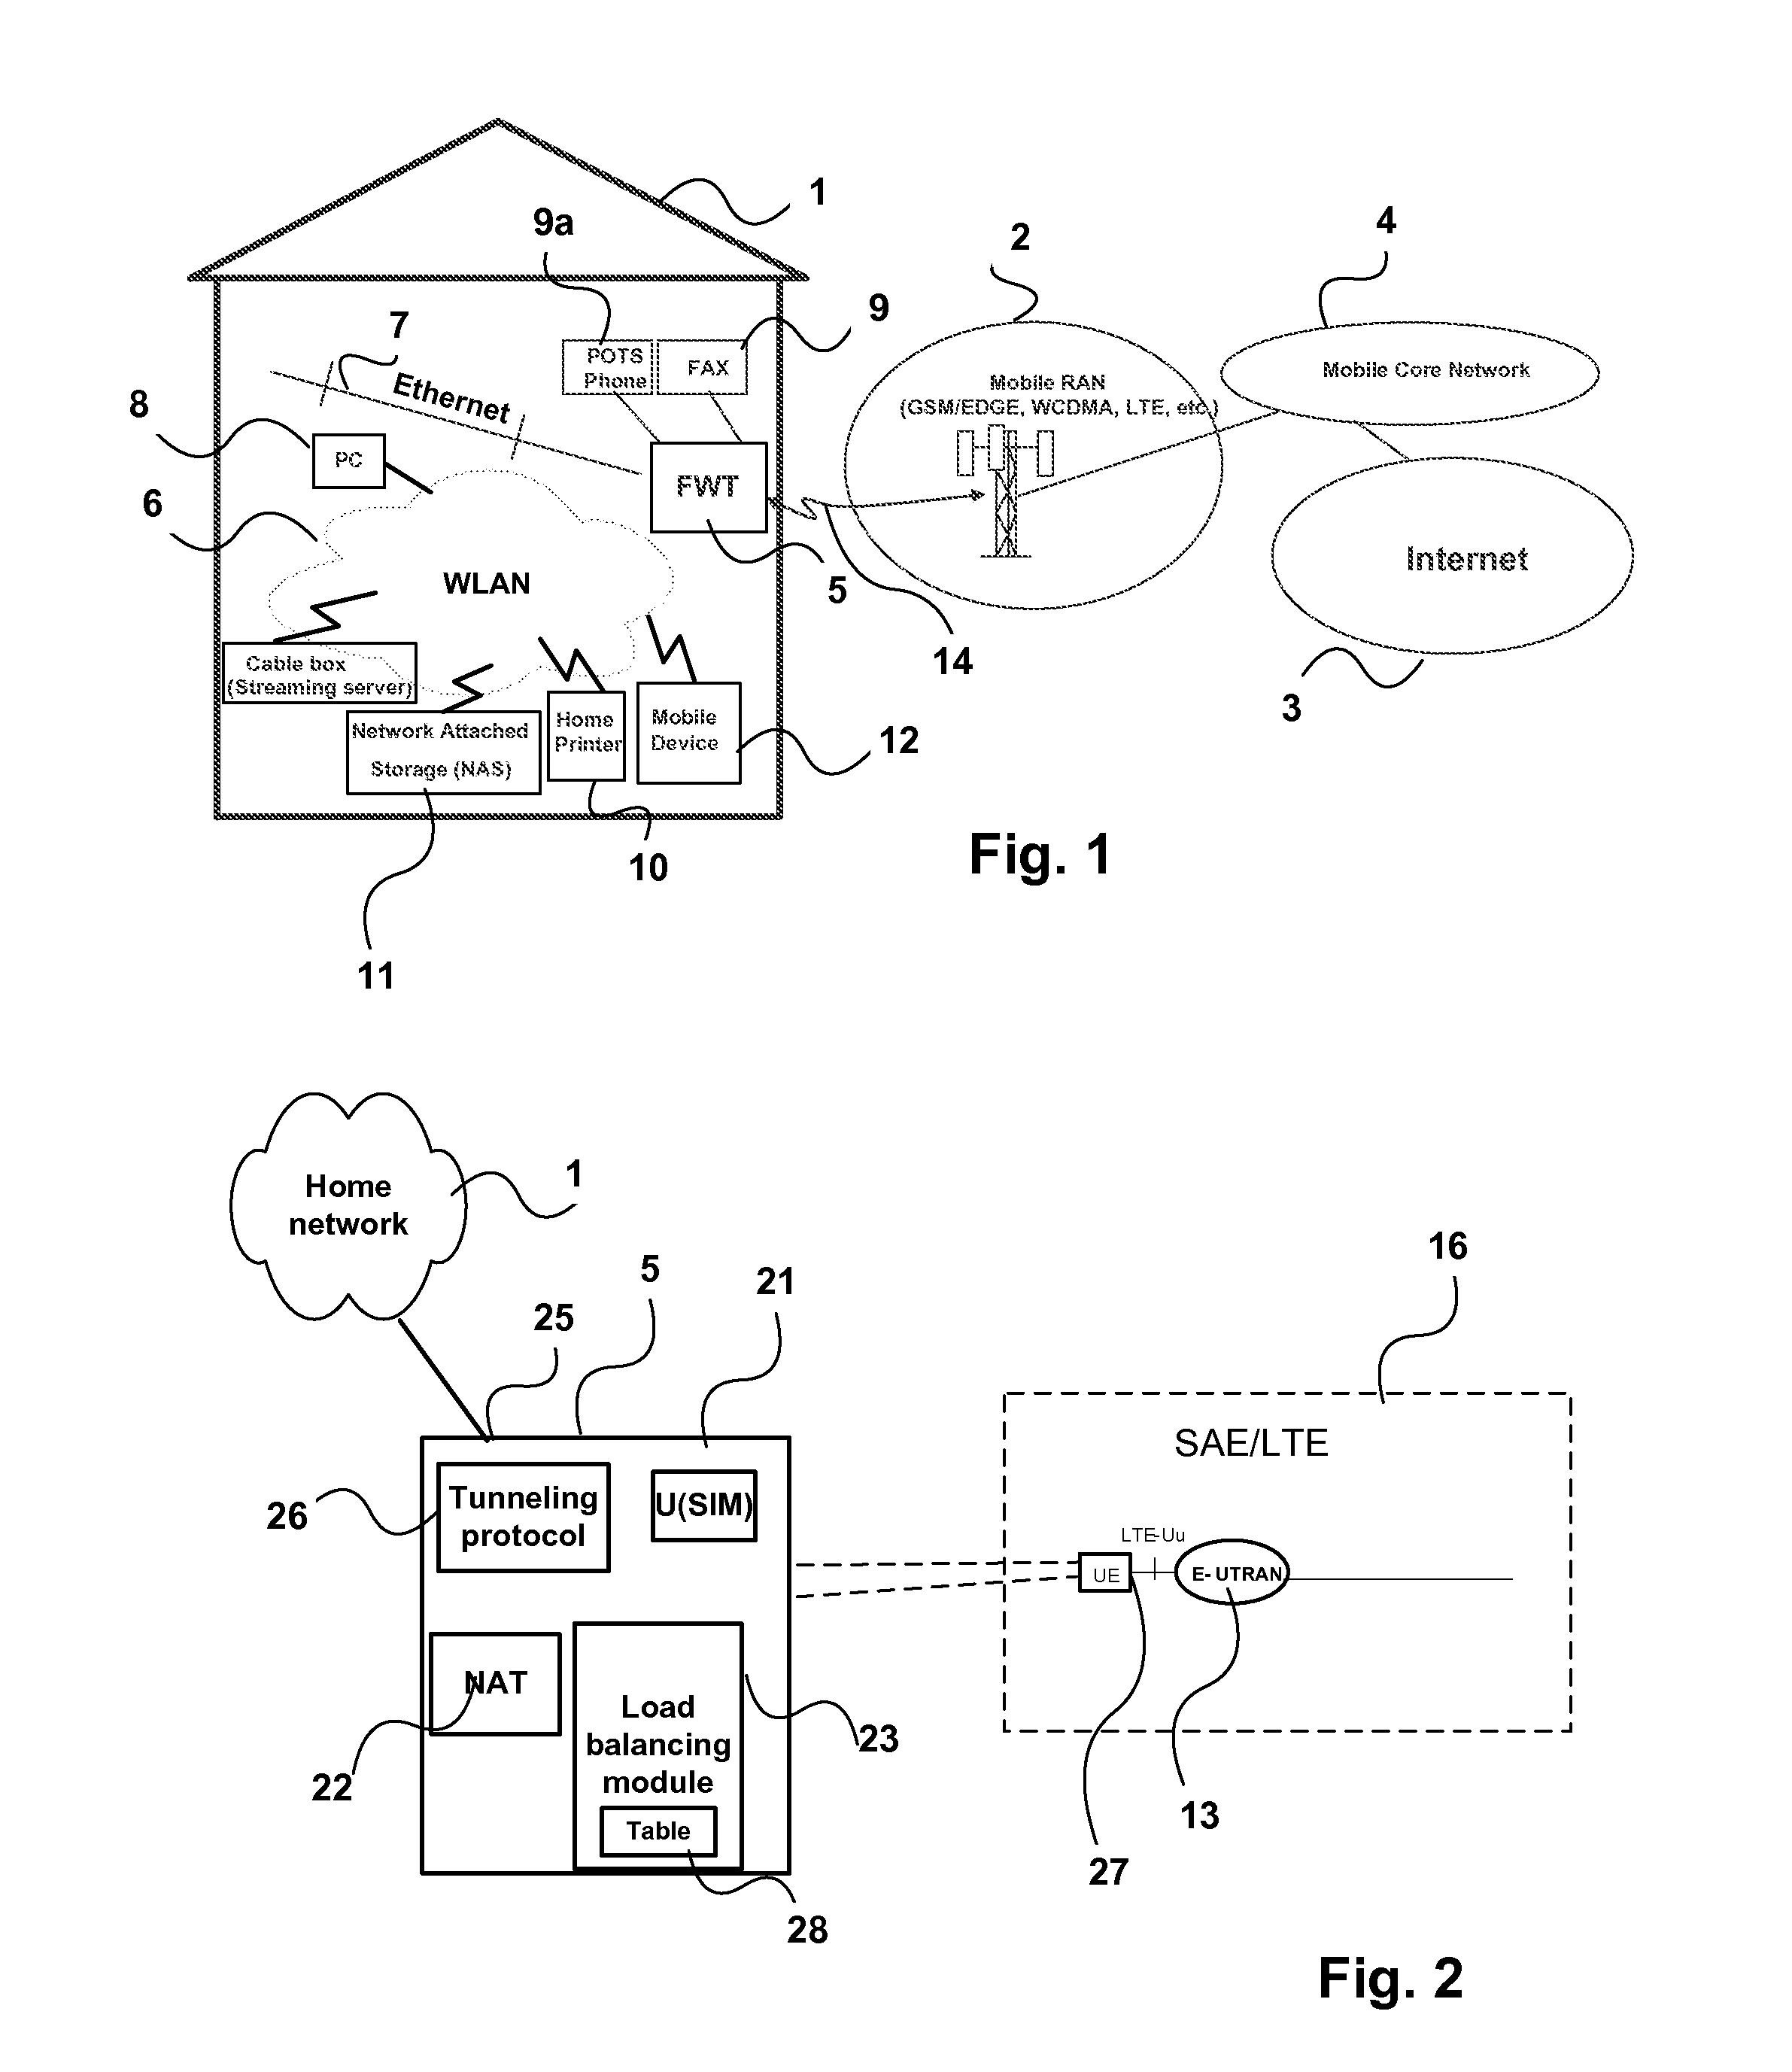 Method and Apparatus For Providing Access To Public Packet Networks From A Local Environment